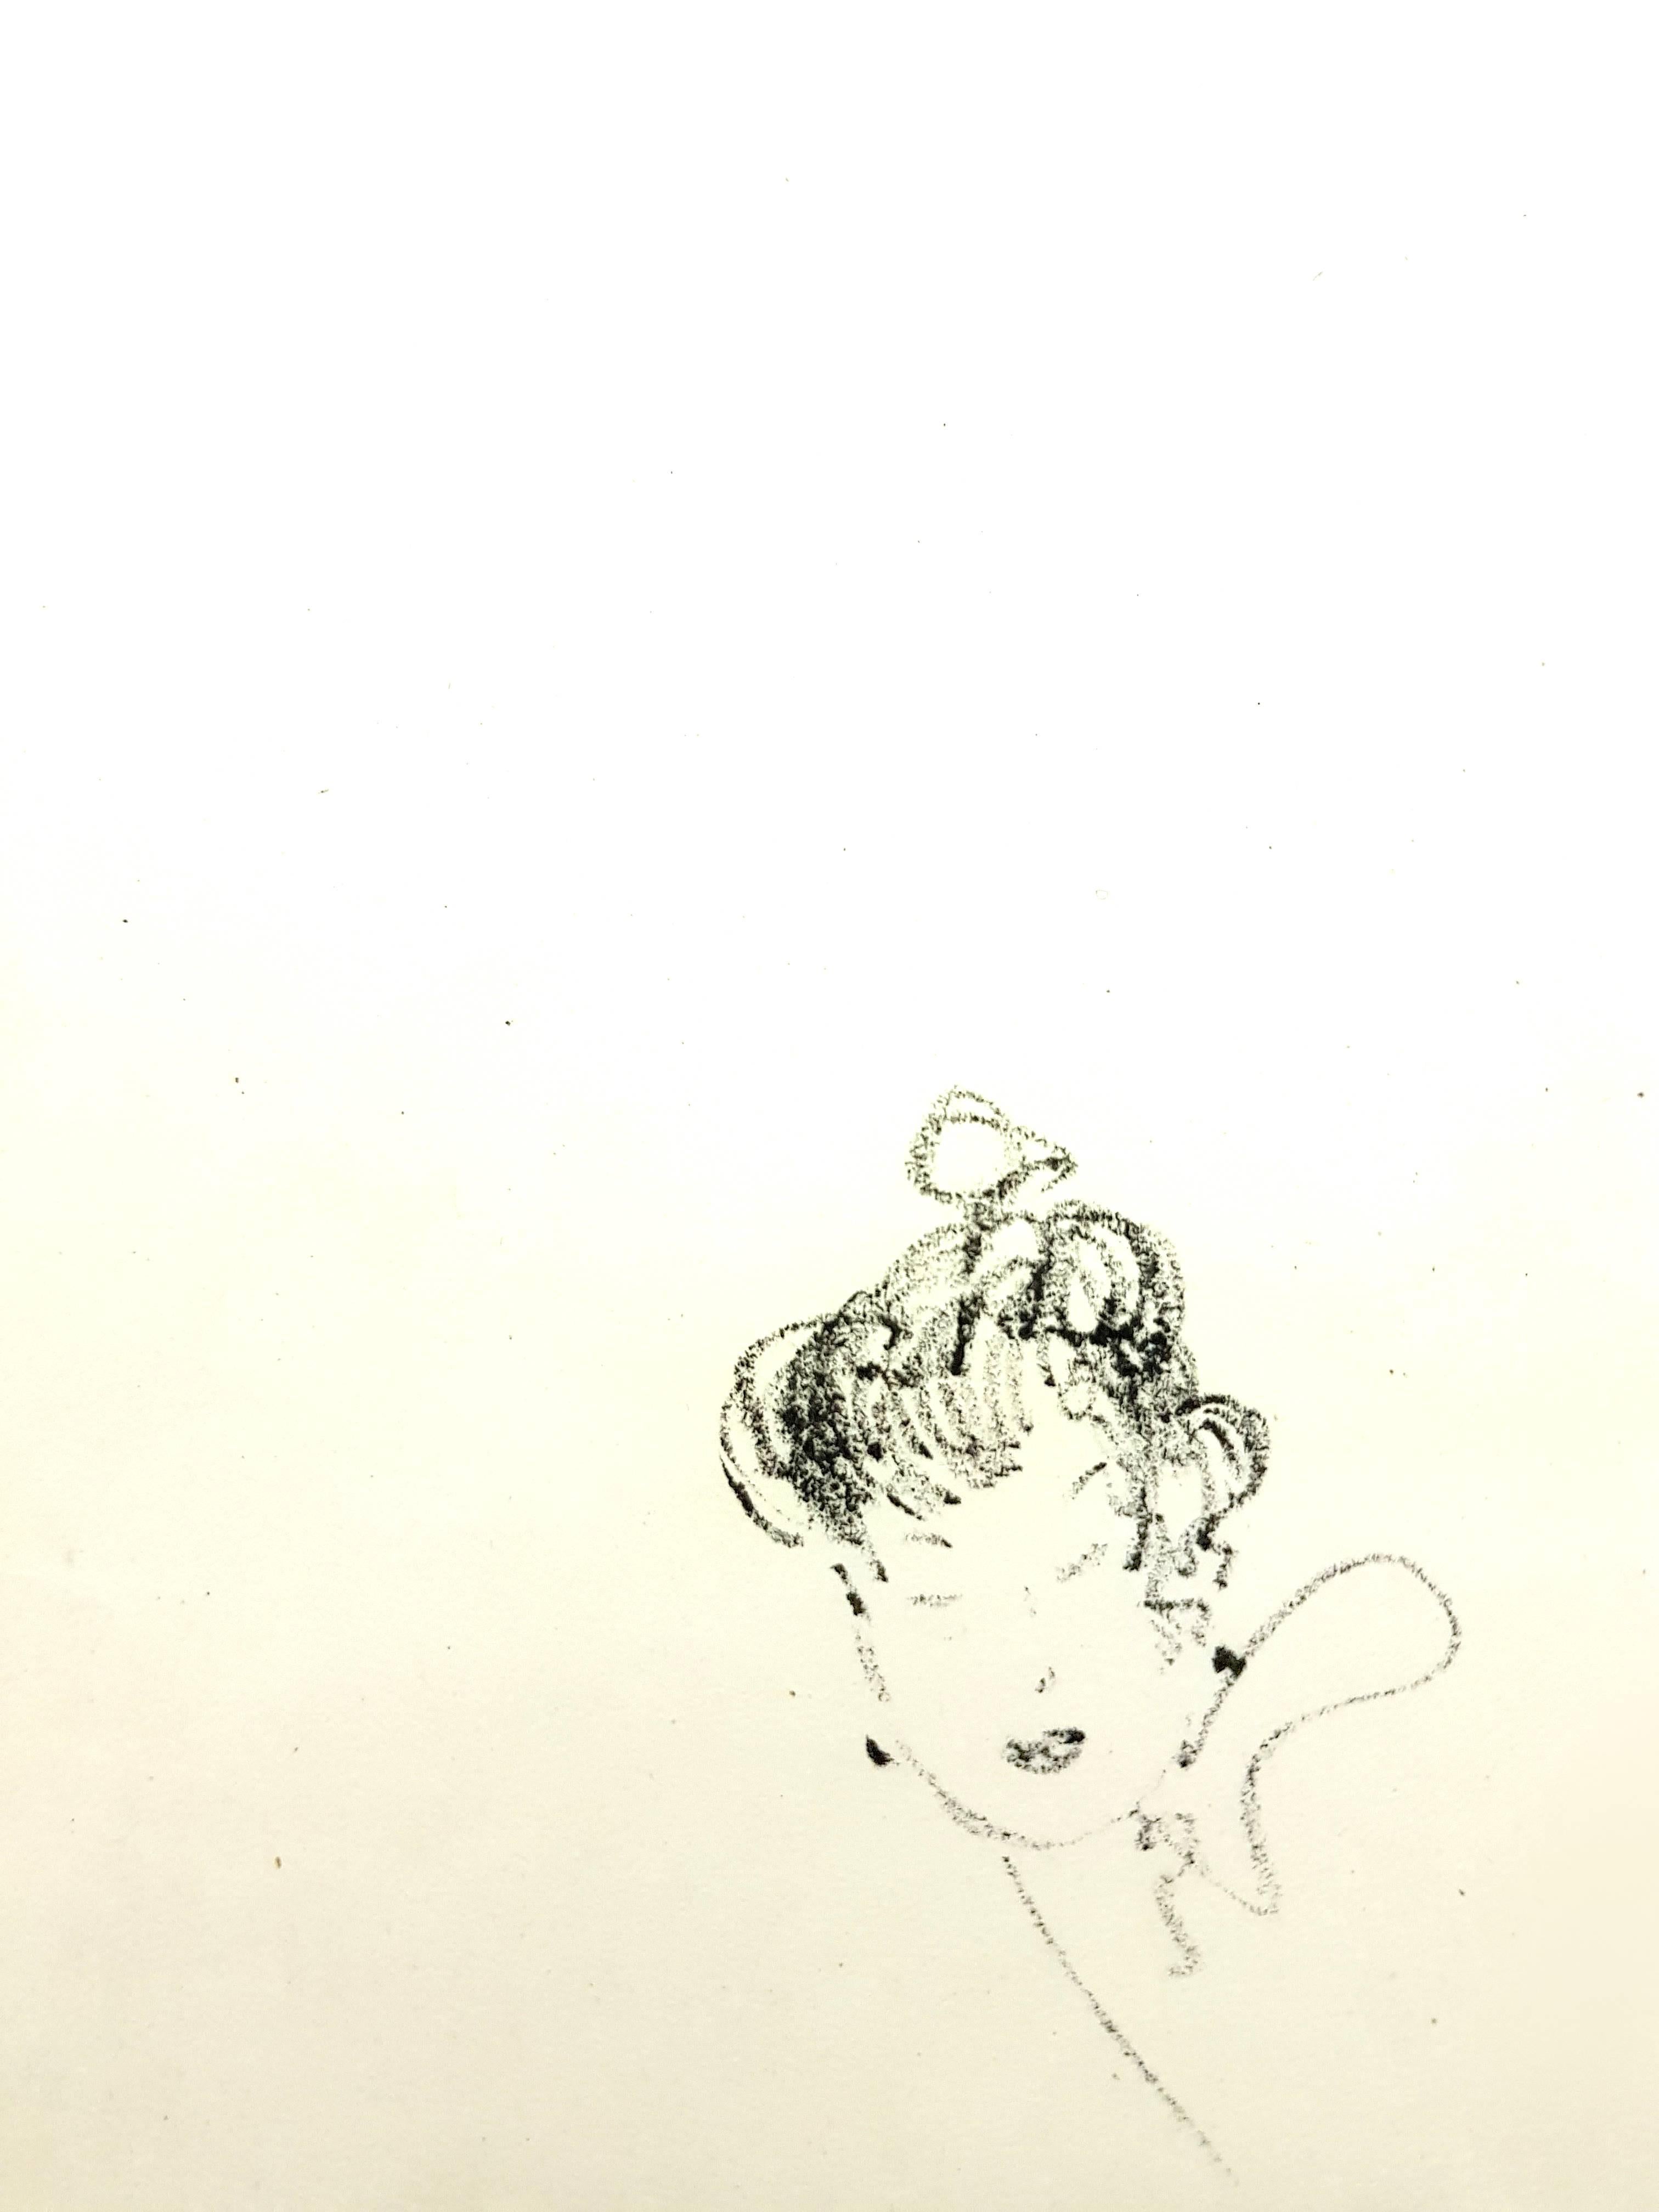 Original Lithograph by Jean-Gabriel Domergue
Title: Naked
Signed 
Dimensions: 40 x 31 cm
1956
Edition of 197
This artwork is part of the famous portfolio 